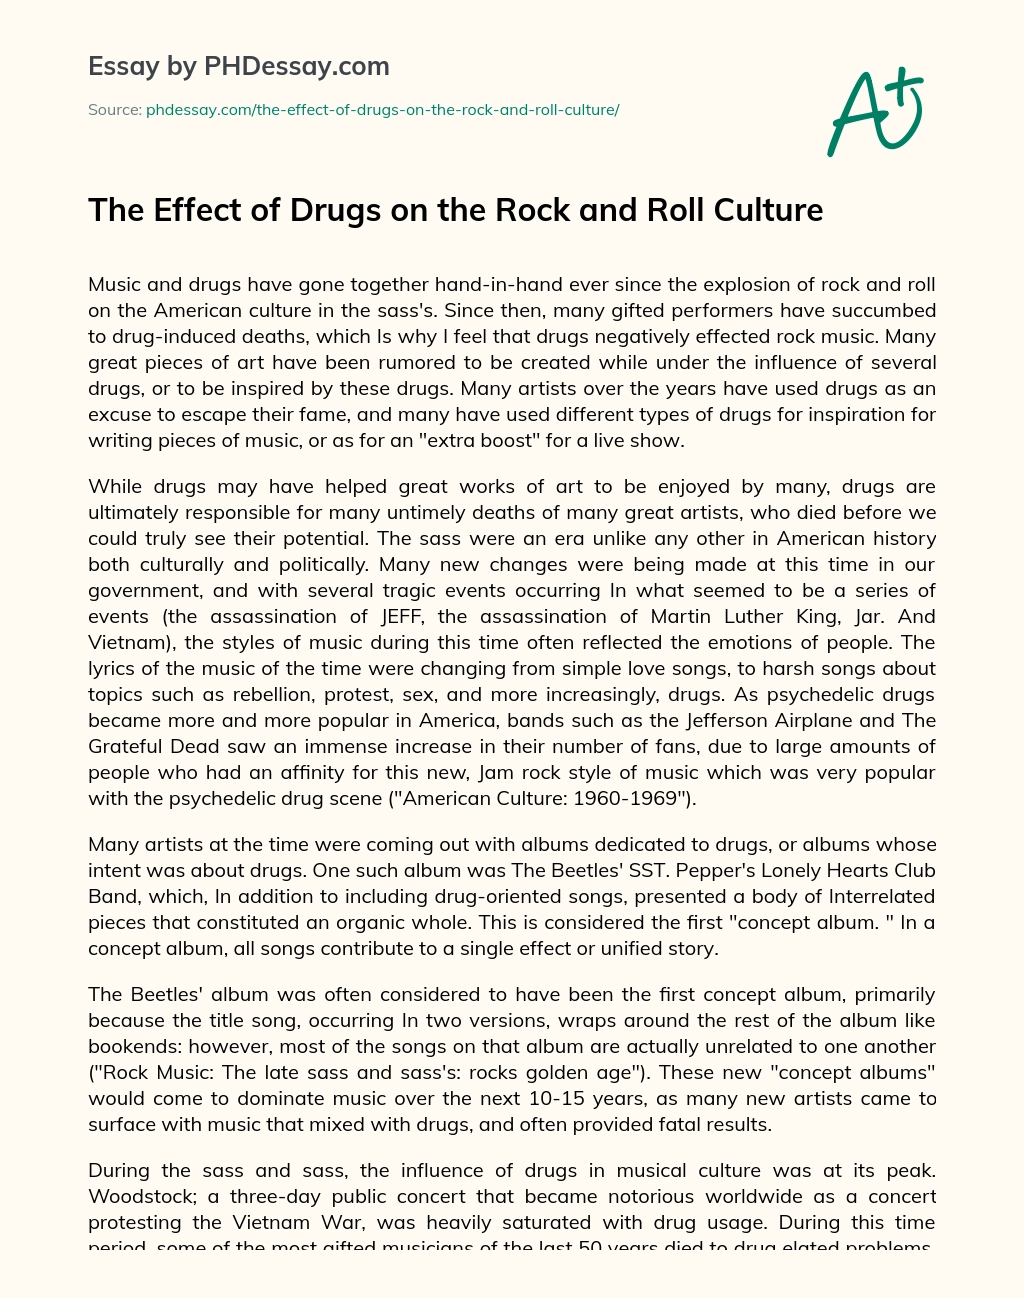 The Effect of Drugs on the Rock and Roll Culture essay